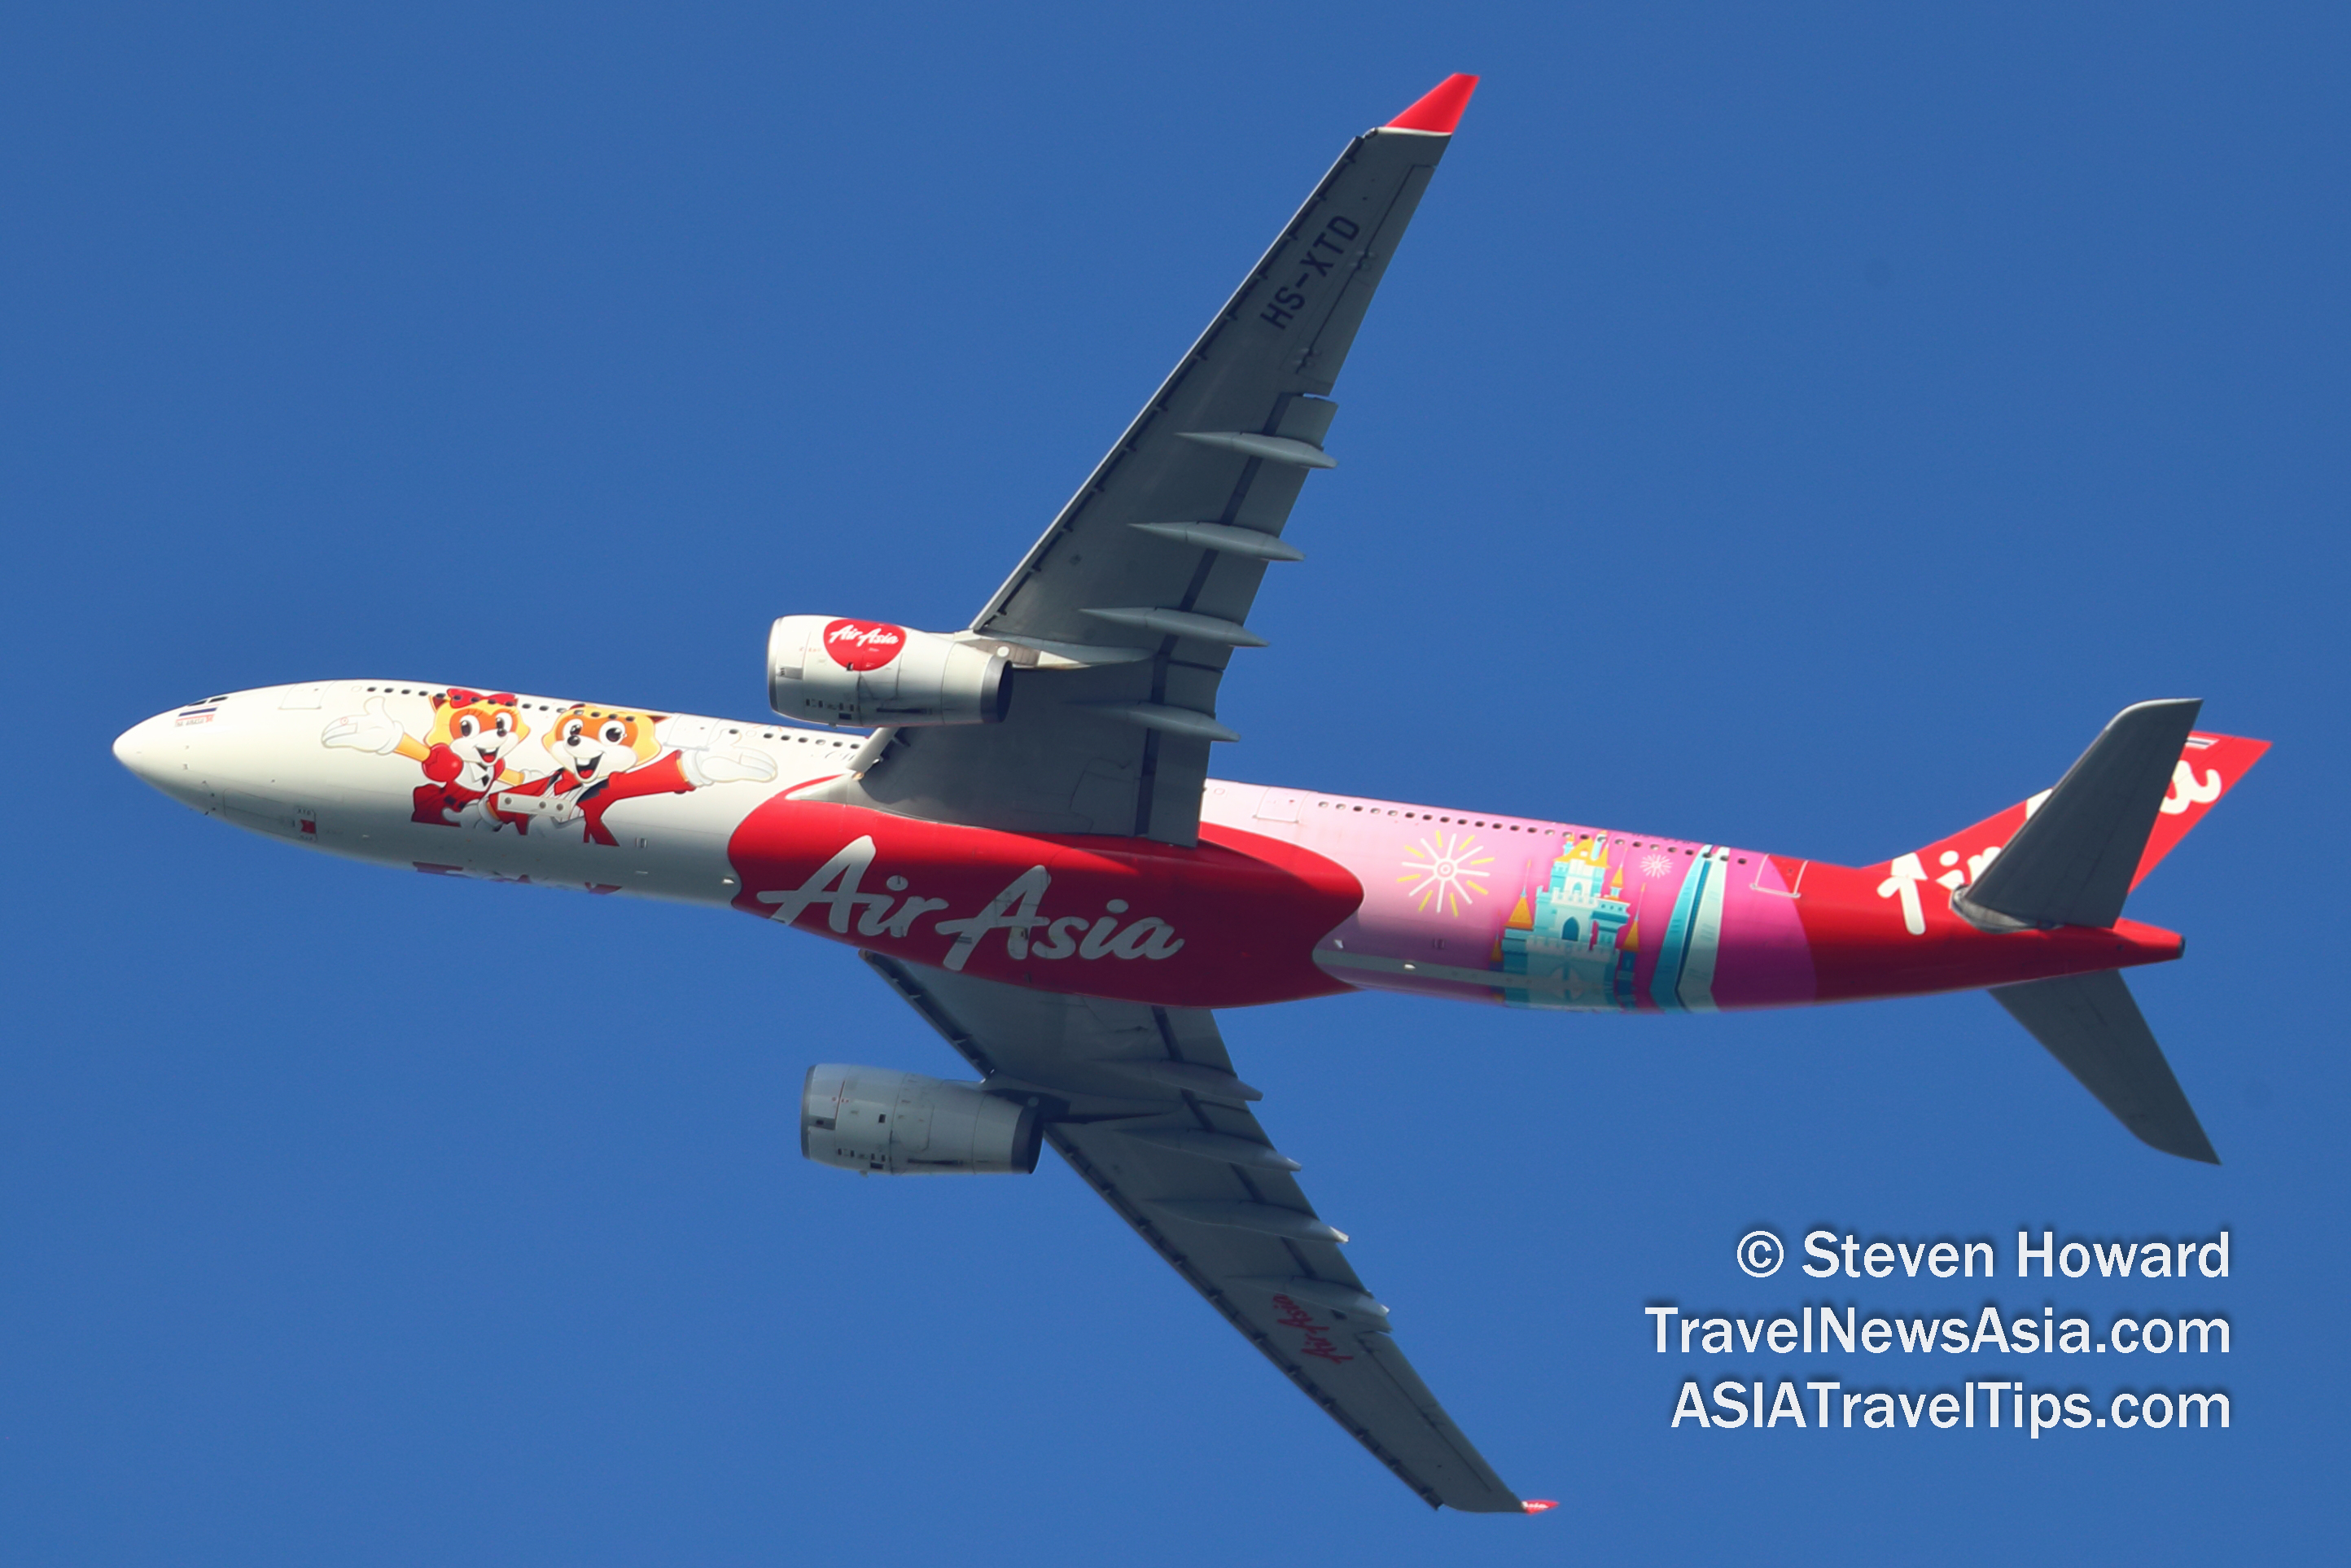 Thai AirAsiaX Airbus A330-300 reg: HS-XTD. Picture by Steven Howard of TravelNewsAsia.com Click to enlarge.